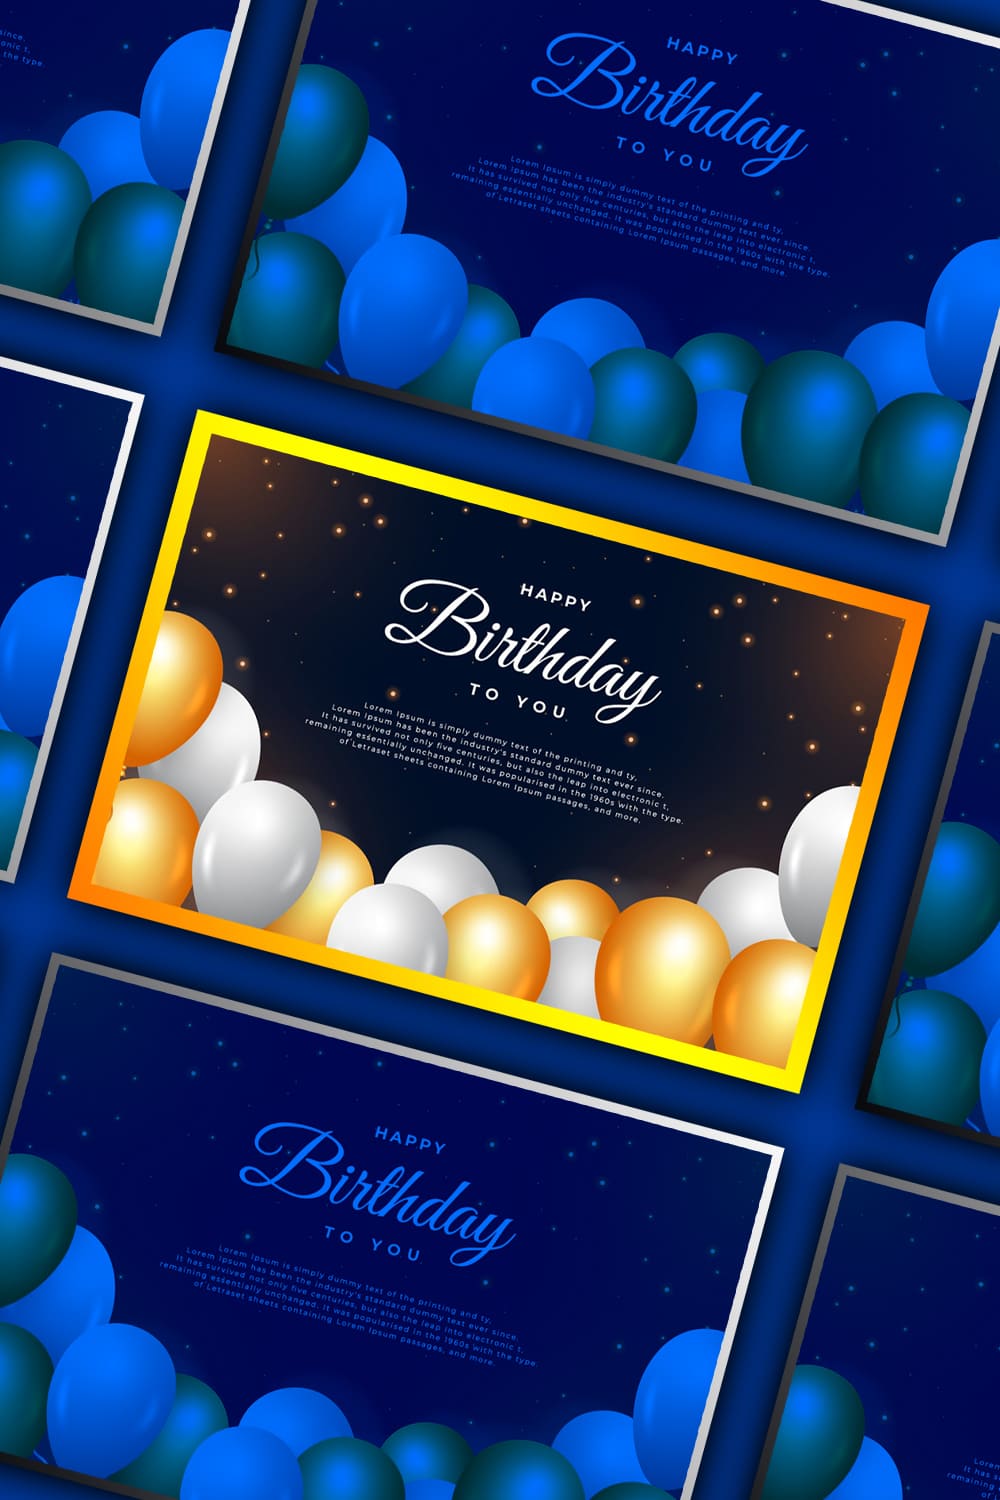 Happy birthday banner with confetti, picture for pinterest 1000x1500.